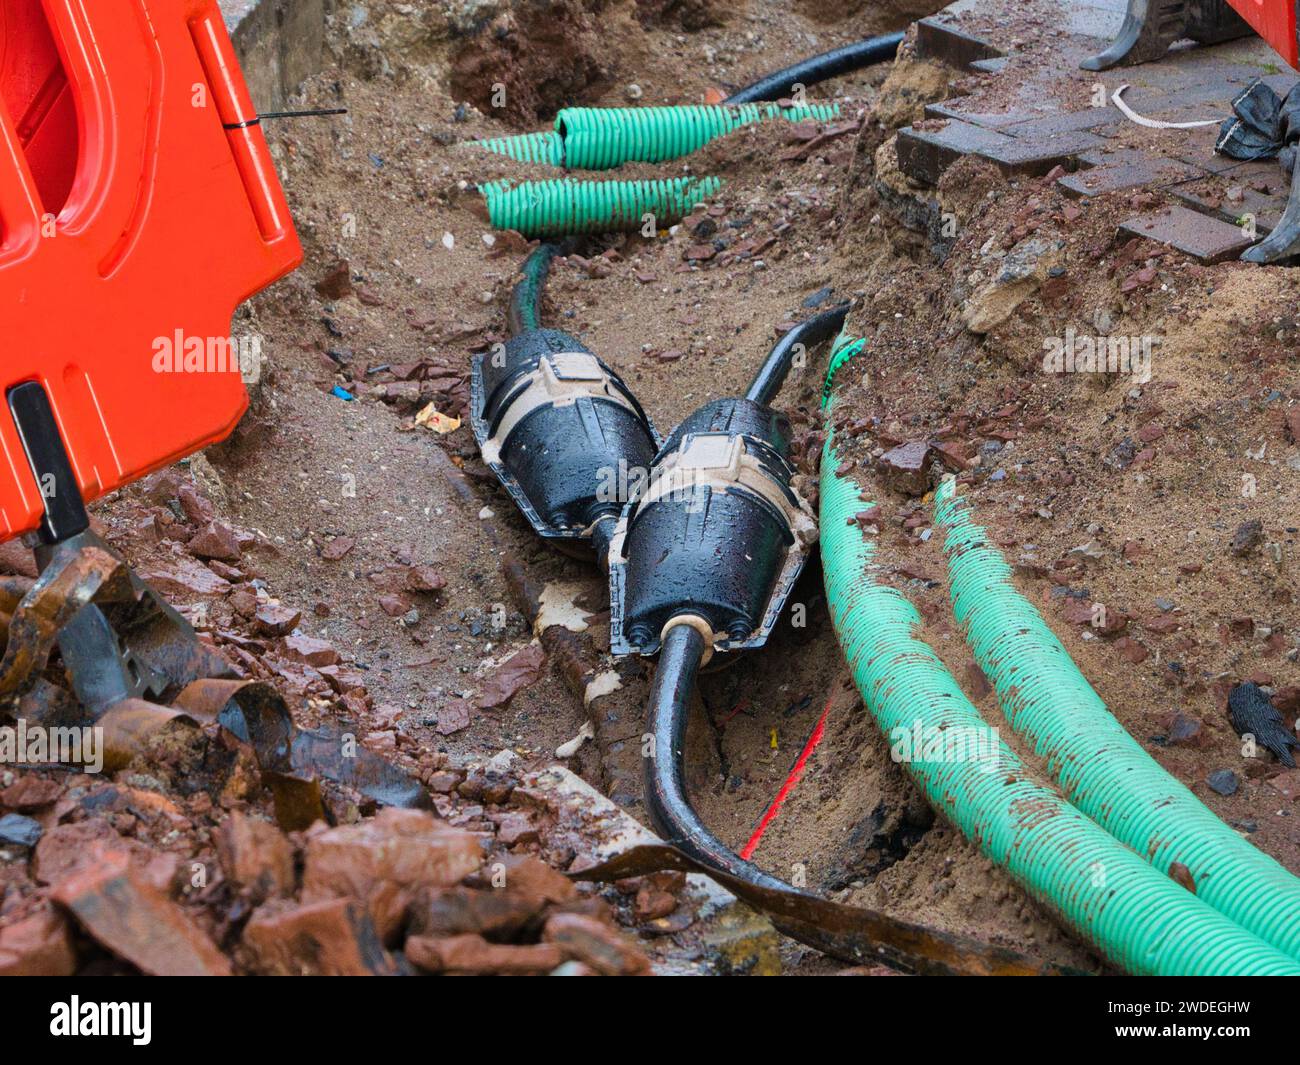 Wirral, UK - Dec 31 2023: Resin filled electrical cable connectors in an excavation in an urban area in the UK. Other utility infrastructure can be se Stock Photo